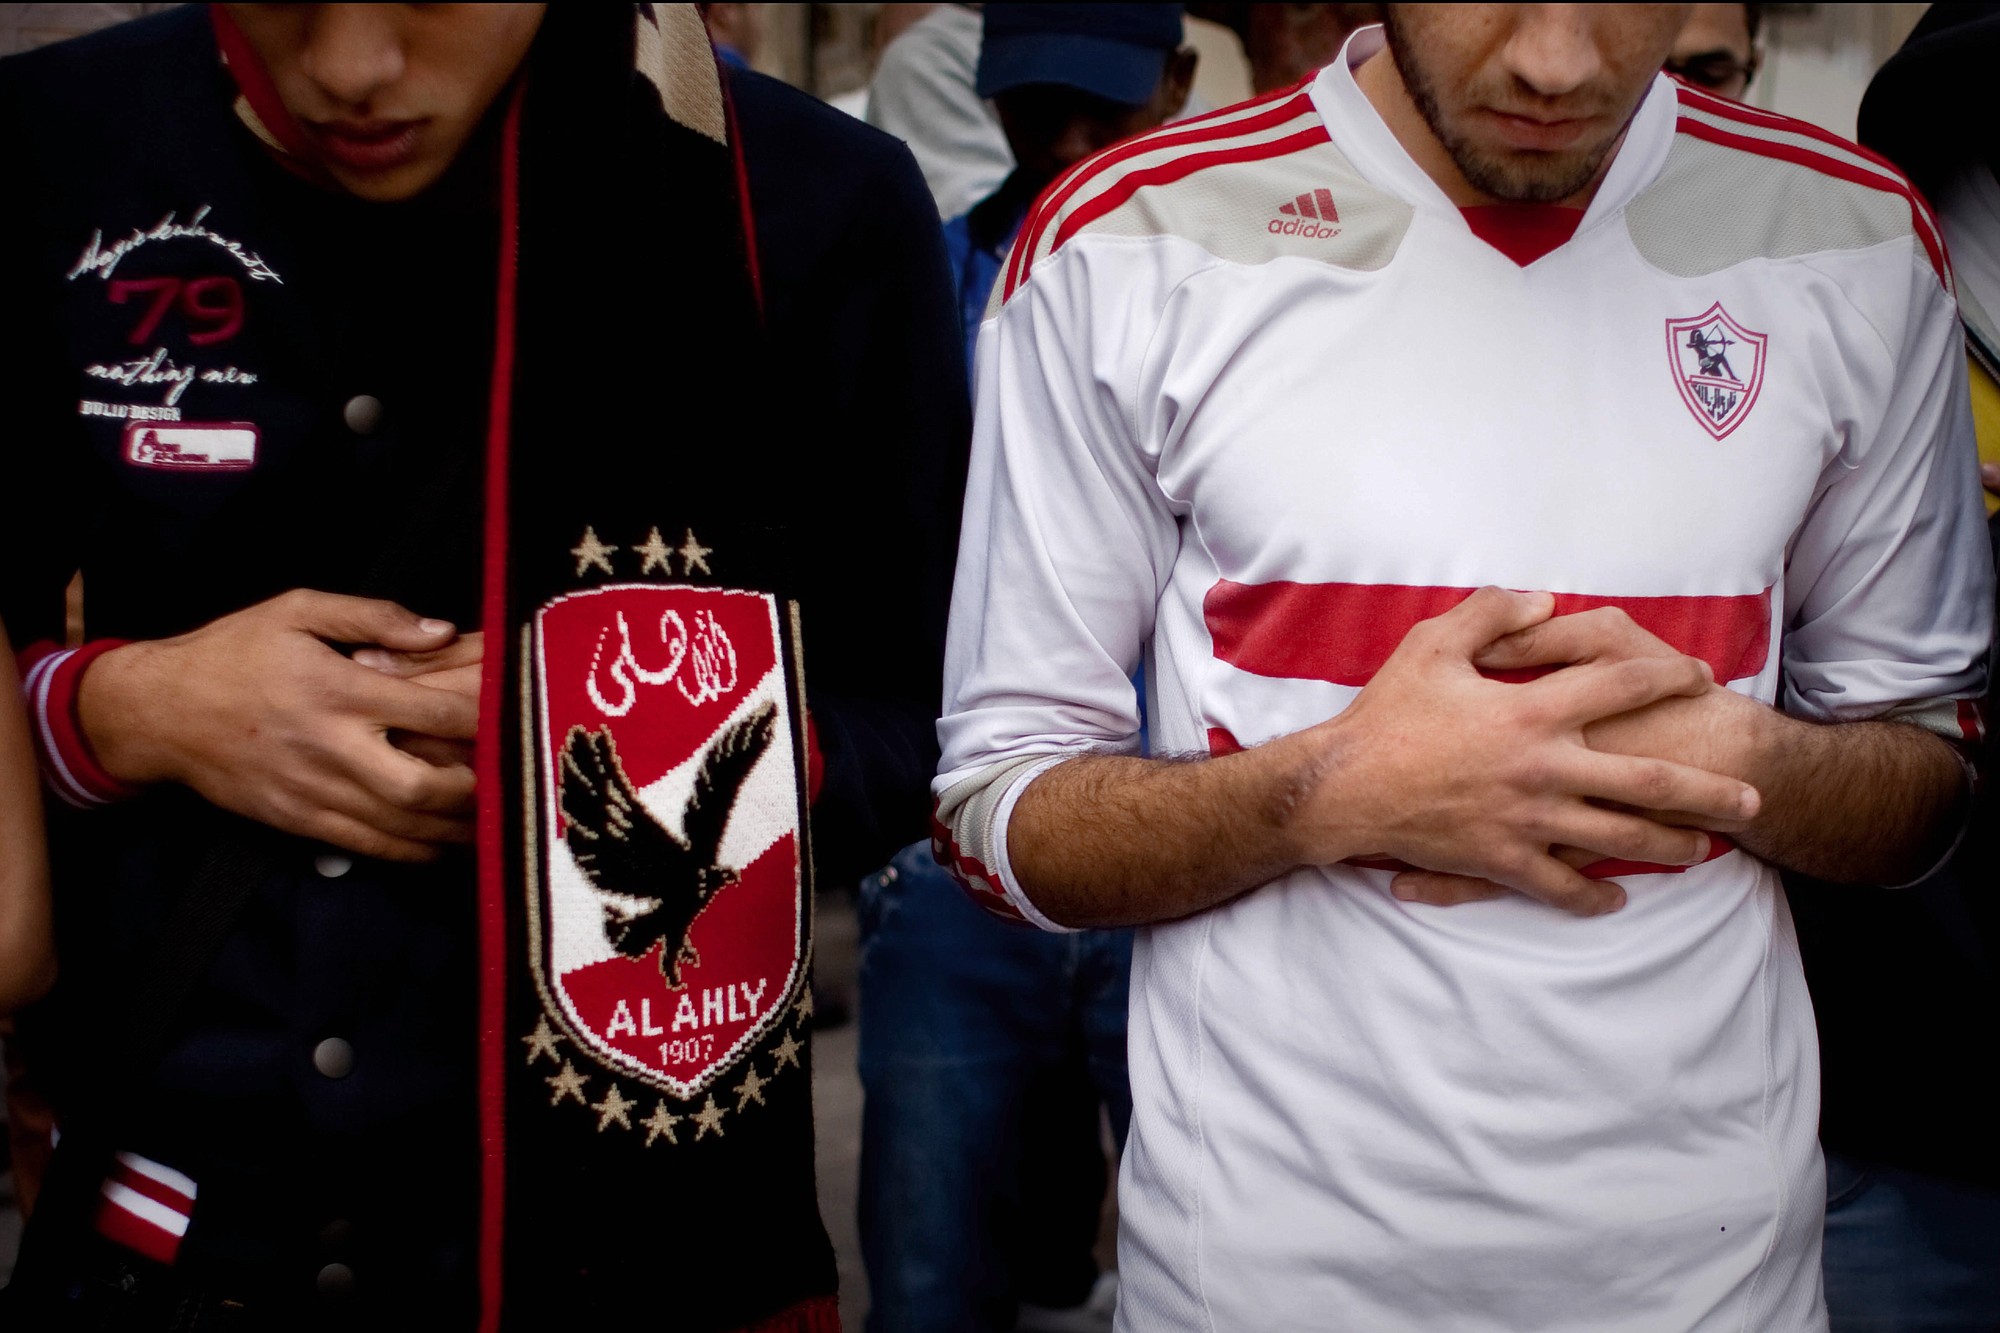 An Ultras Al-Ahly soccer fan, left, and an Ultras White Knights soccer fan, right, pray Monday for people who were killed on Sunday from a riot outside the Air Defense Stadium, at Cairo University in Egypt.